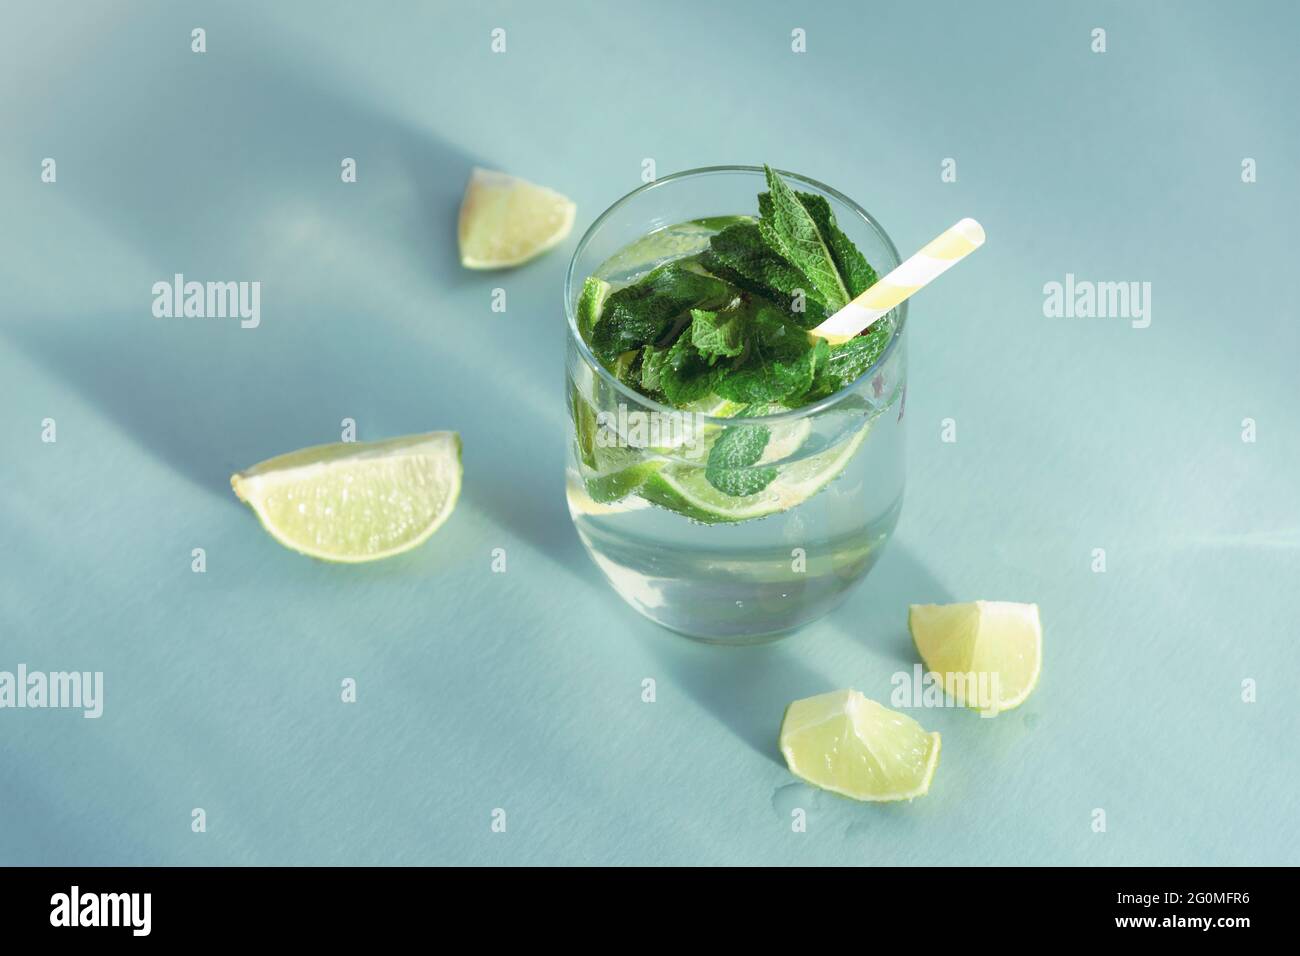 Mojito drink with straw on blue table. Cold refreshing drink with mint and lemon slices, top view. Stock Photo